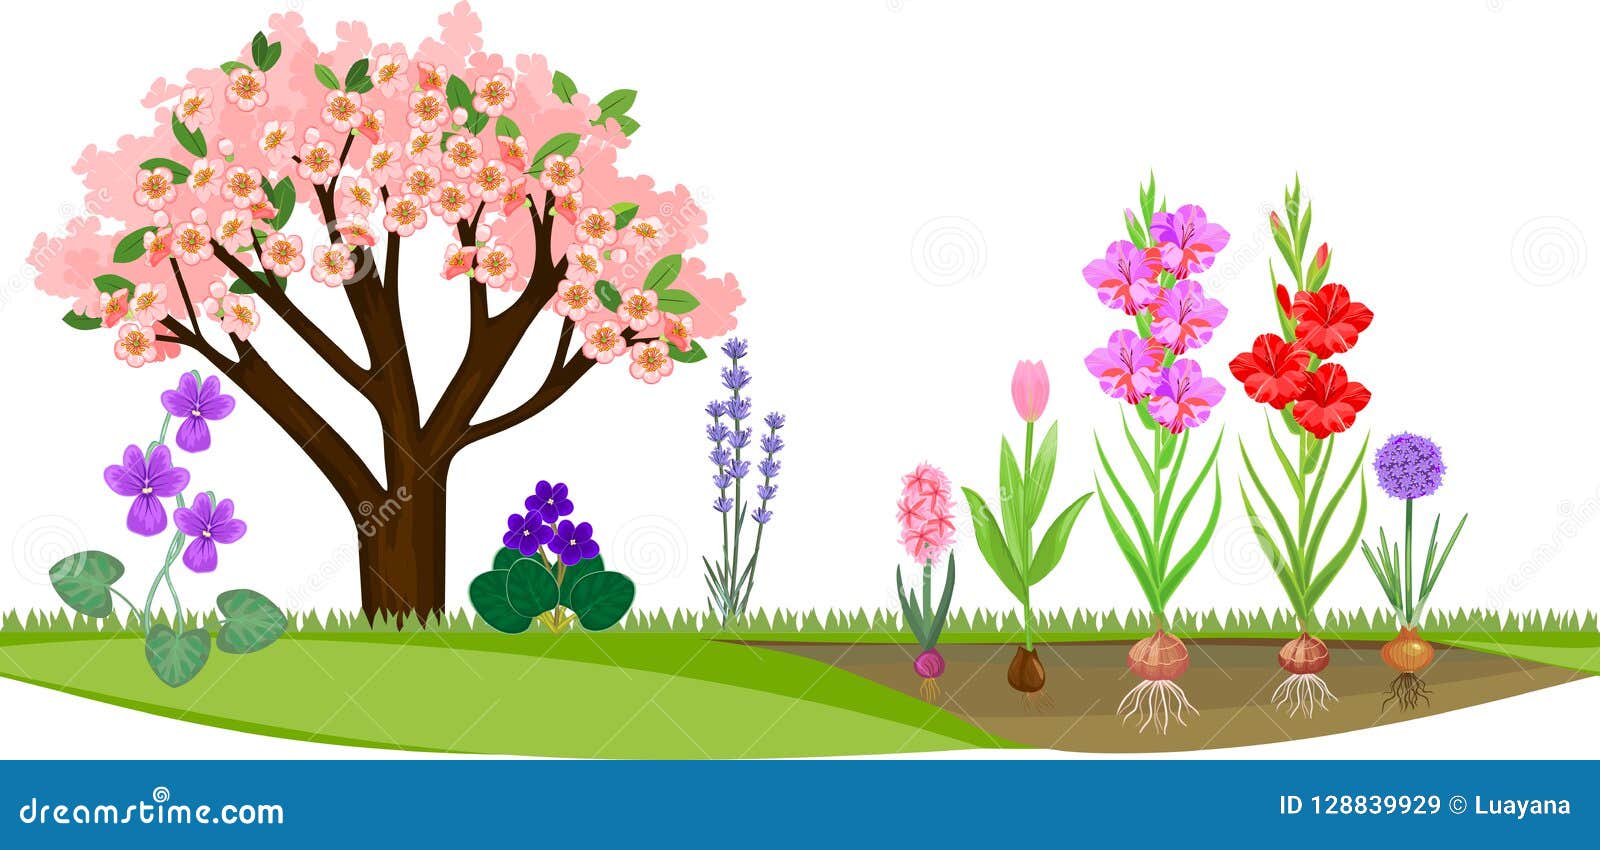 Garden With Flowering Tree And Different Blooming Plants Stock Vector ...